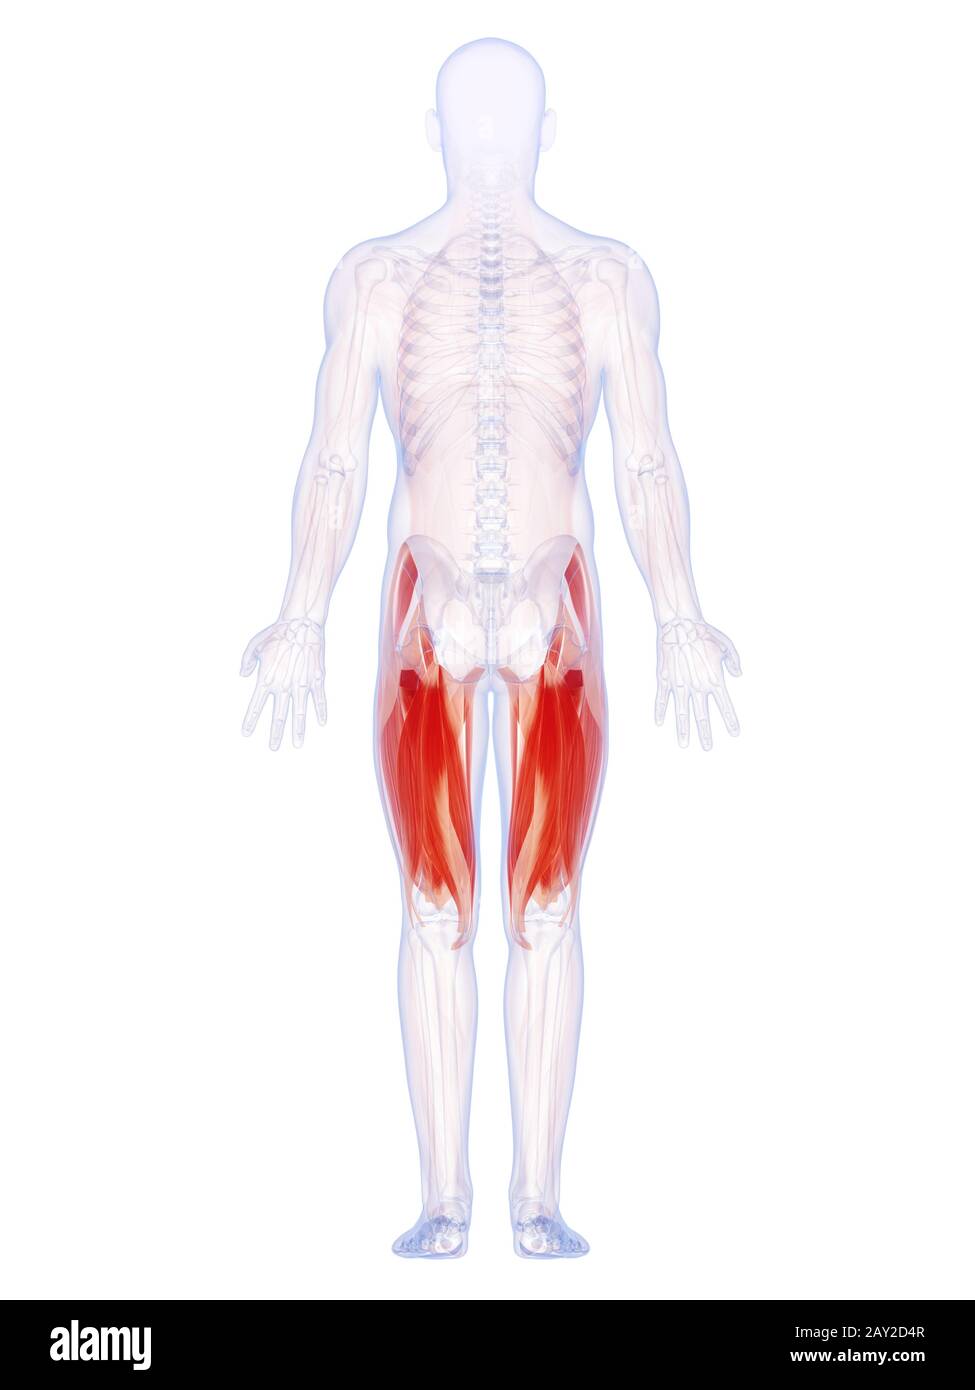 3d rendered illustration of the upper leg muscles Stock Photo